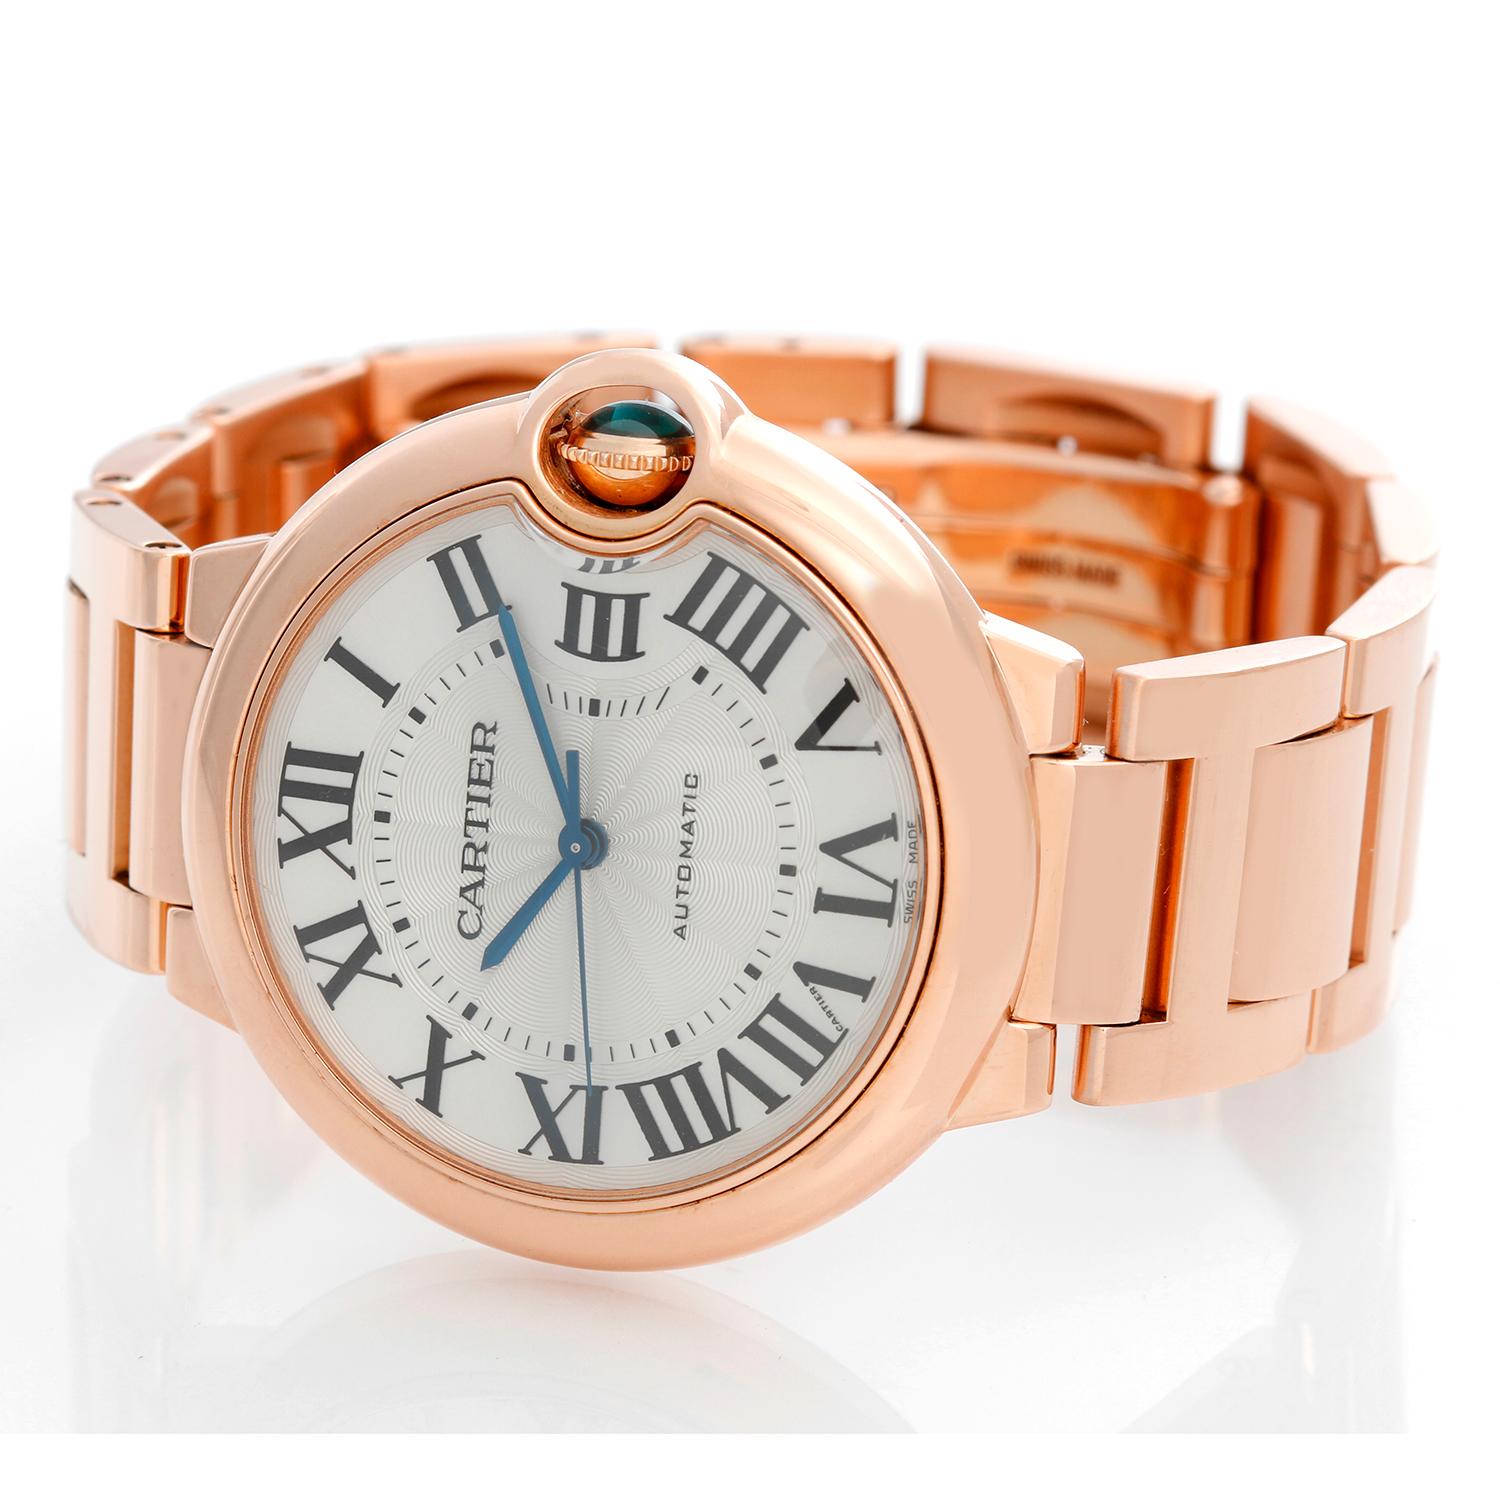 Cartier Ballon Bleu 18K Rose Gold Ladies Midsize Watch - Automatic winding. 18k Rose gold  case (36 mm ). Silver guilloche dial with black Roman numerals. 18K Rose gold Cartier bracelet. Pre-owned  with Cartier box and papers. 